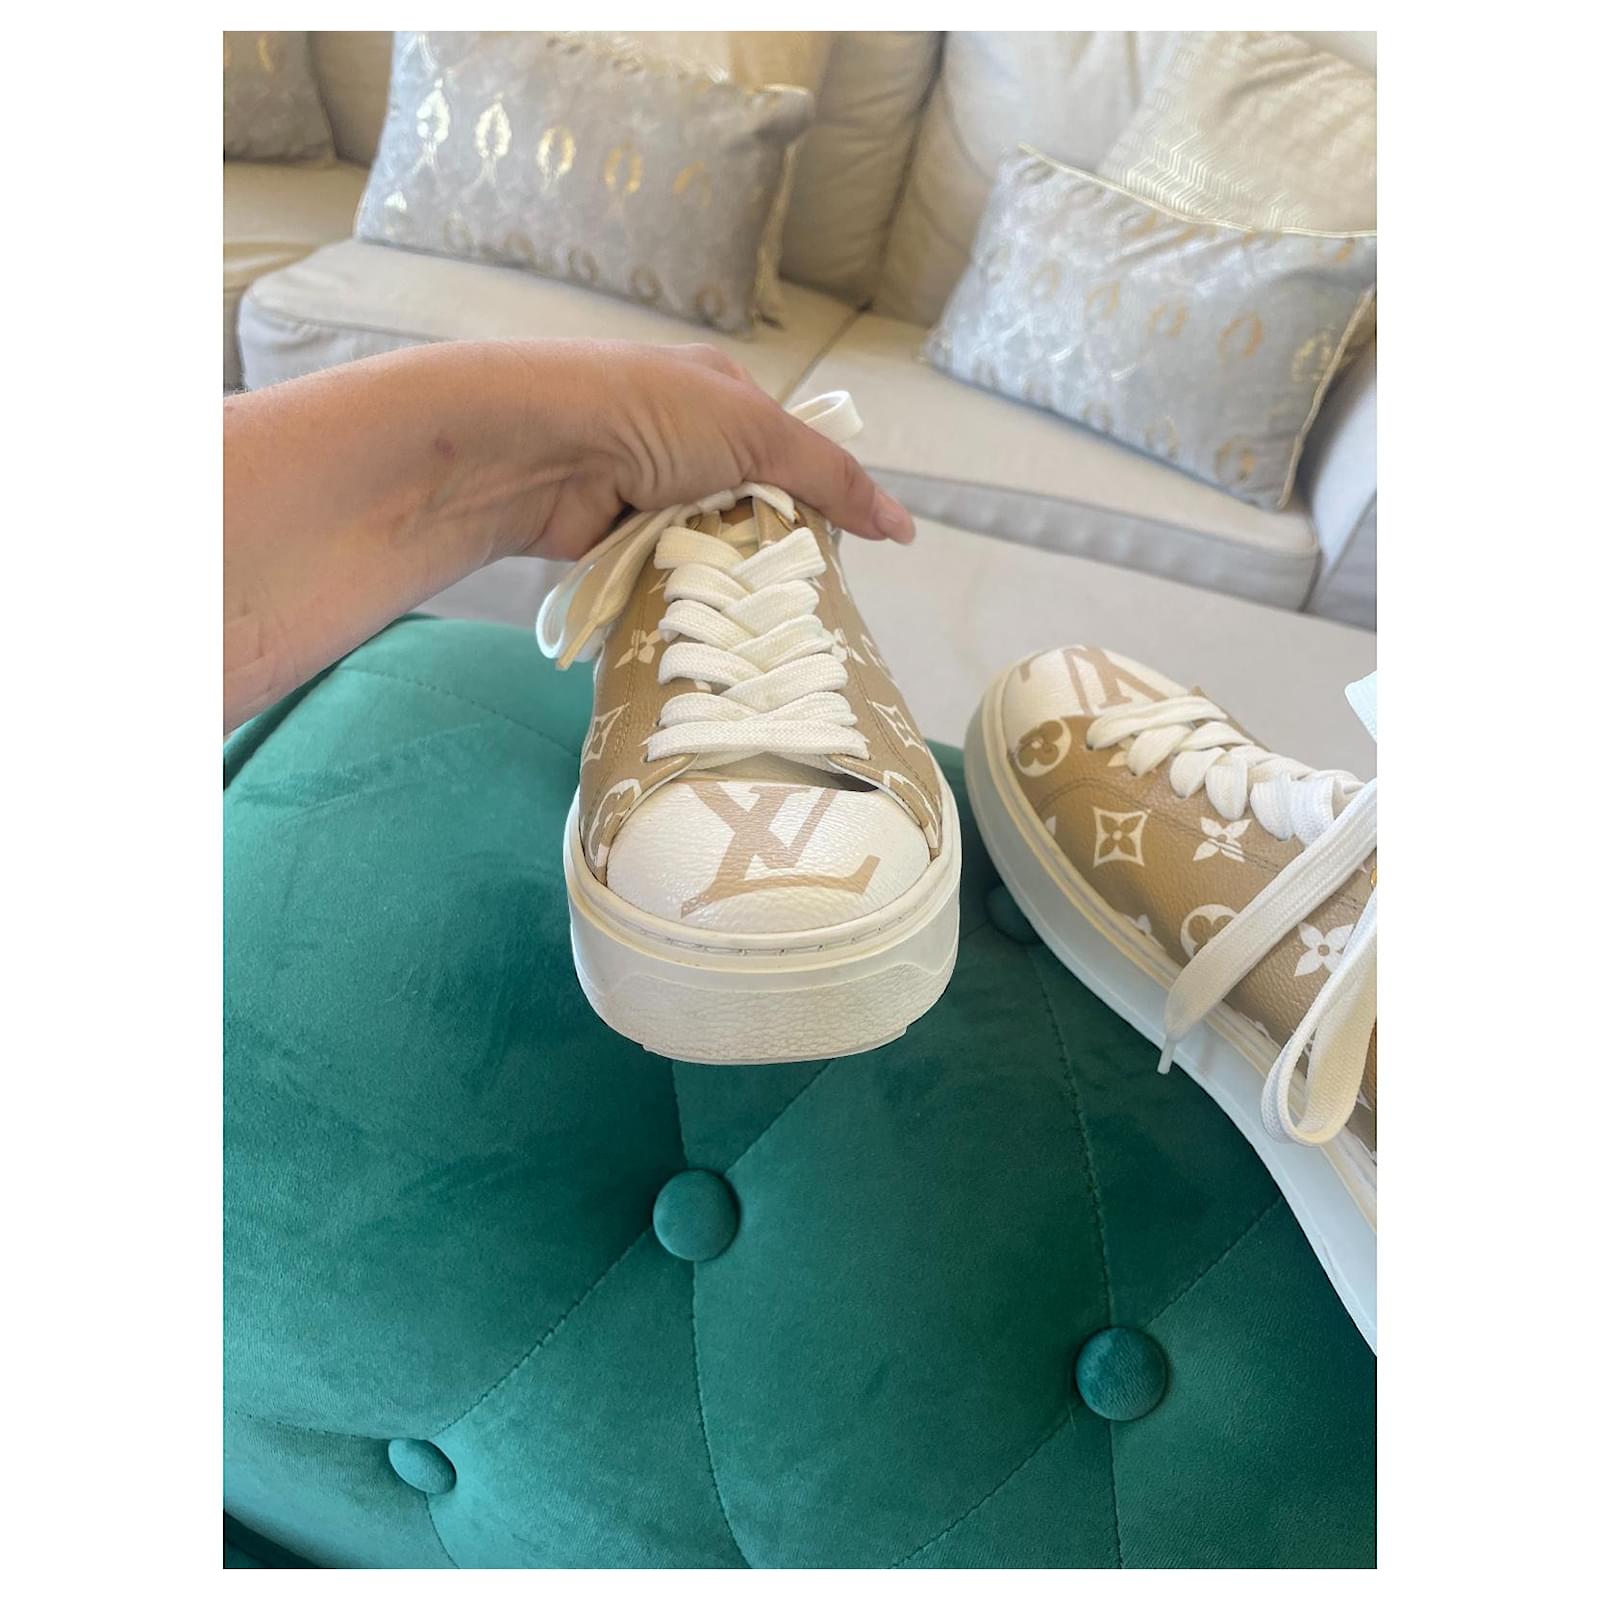 LV Louis Vuitton Time Out Monogram Beige Green White Sneakers